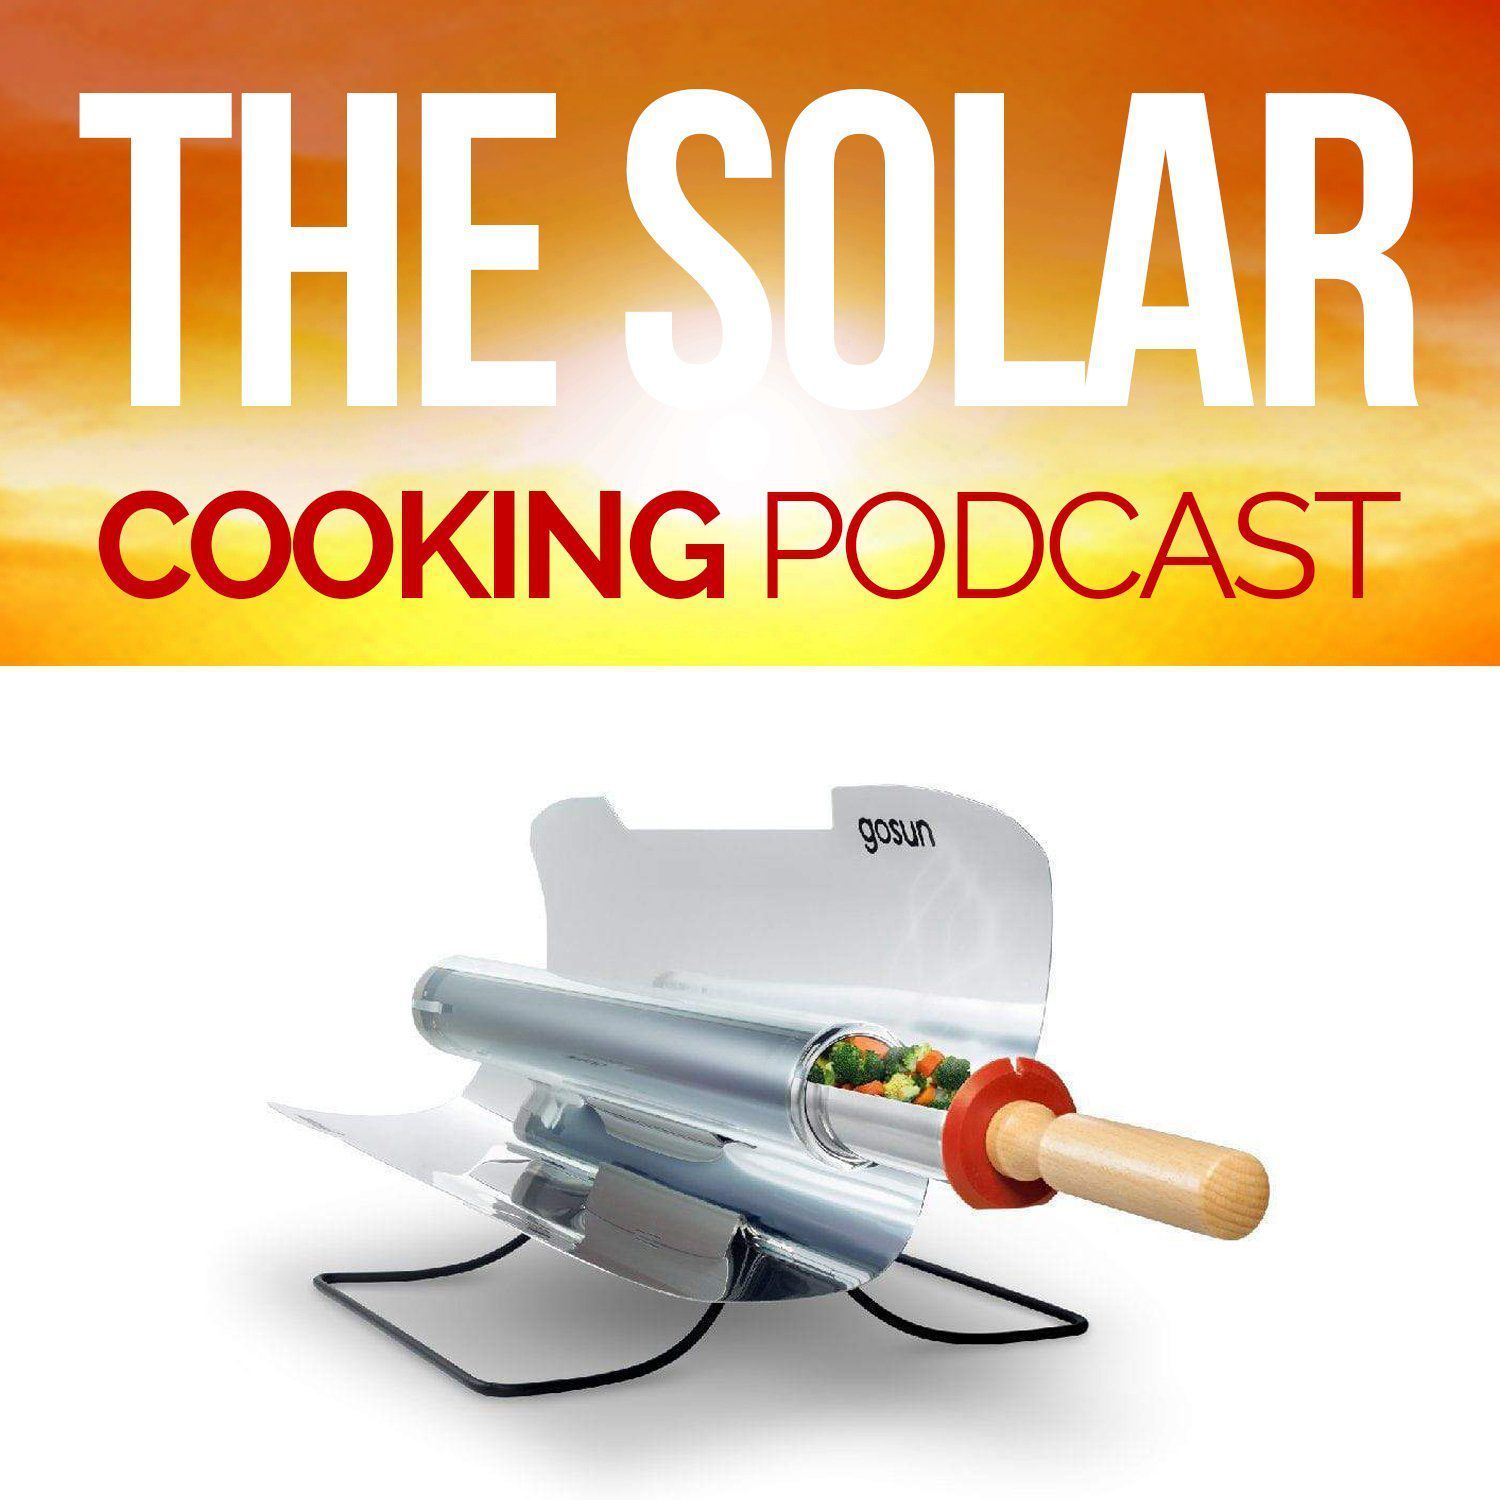 S1 Ep5: Going Camping with a Solar Cooker